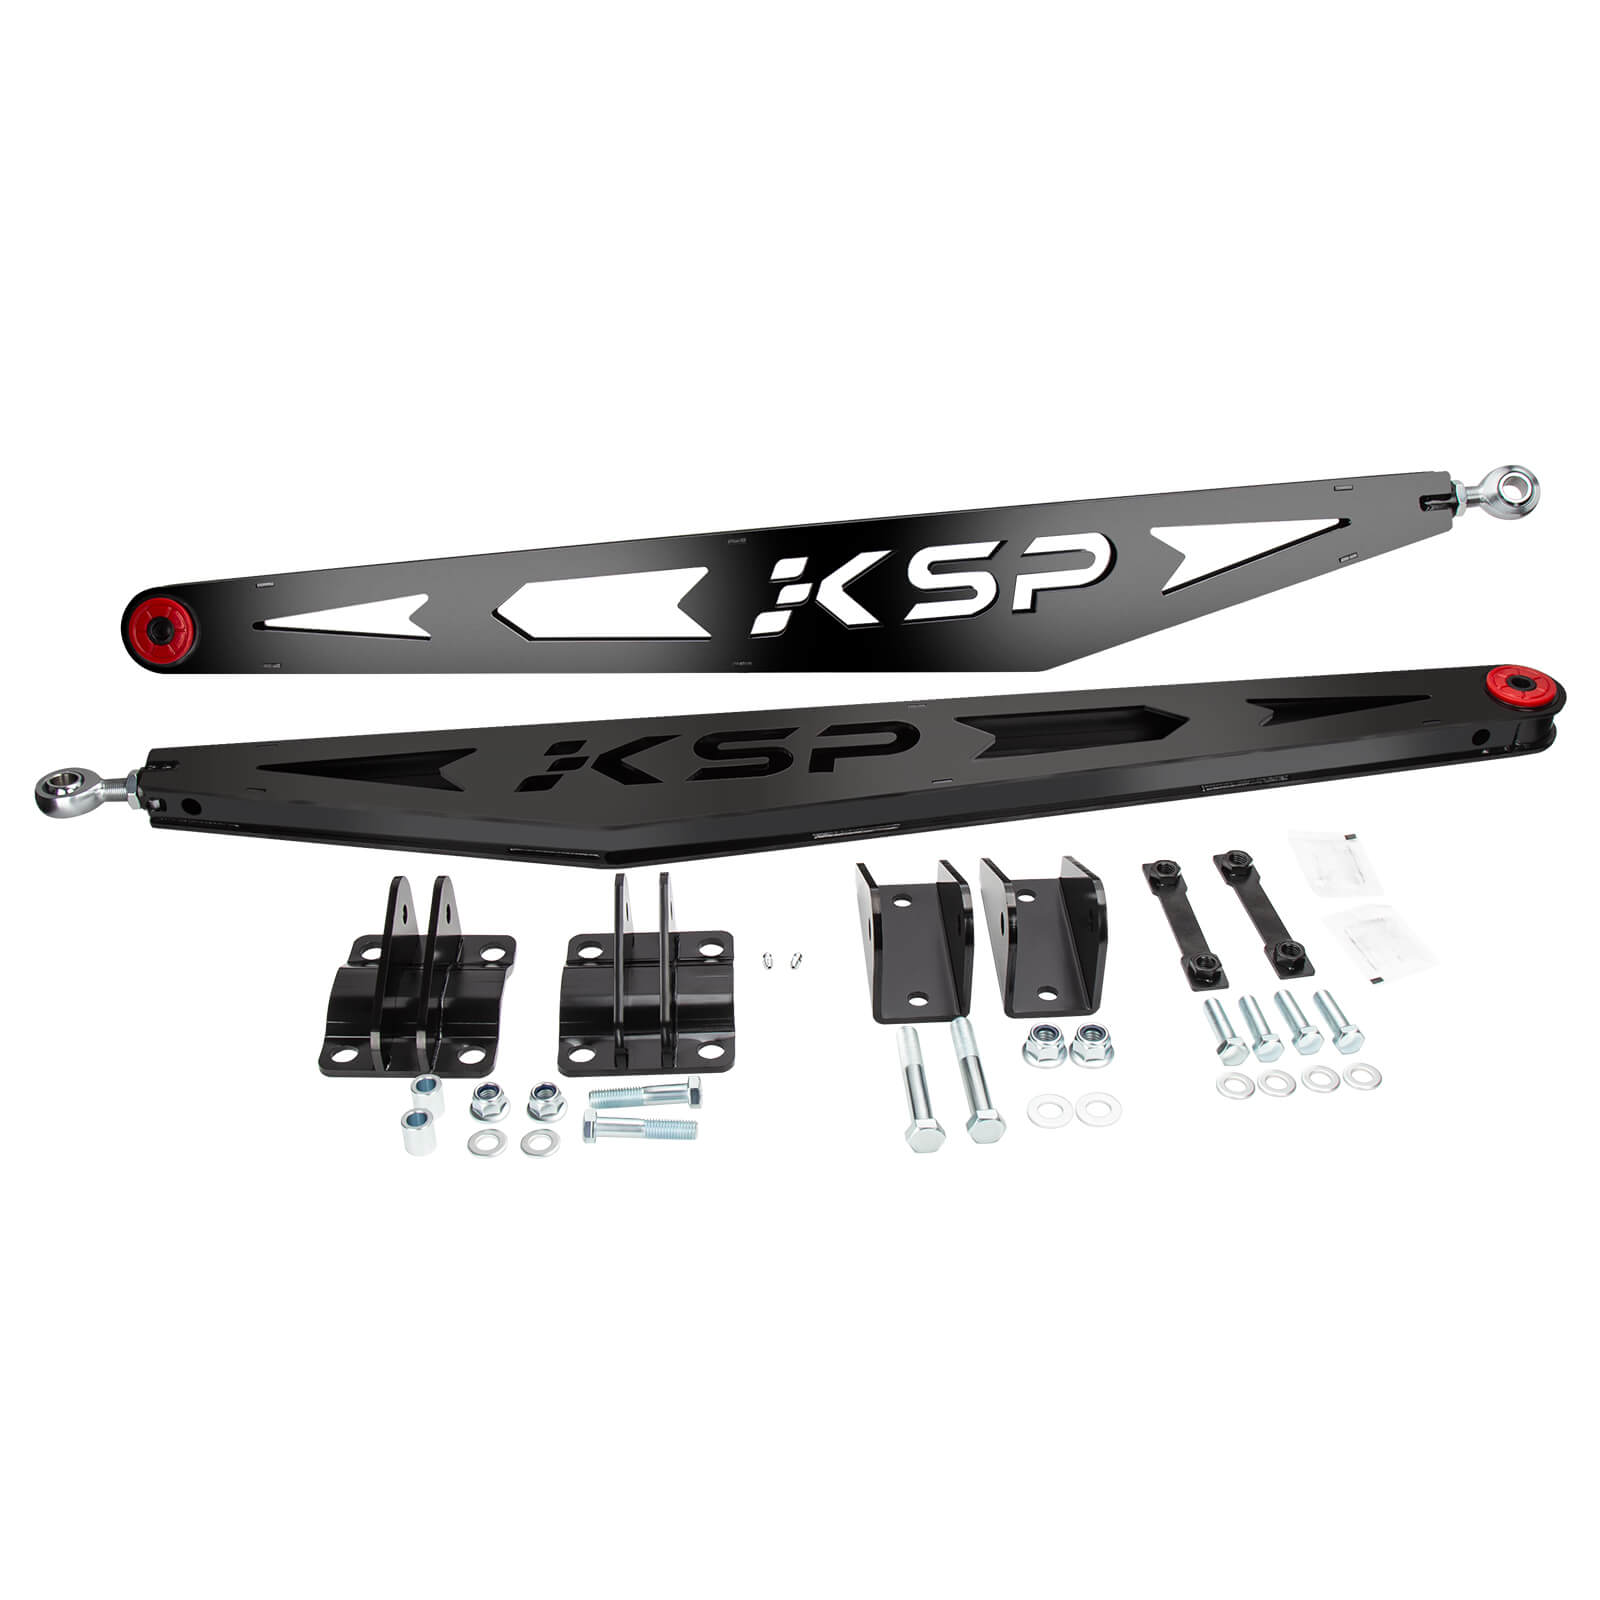 KSP Traction Bar for 2007-2018 Chevy Silverado GMC Sierra 1500 0-7.5 inches Lift, Rear Axle Leaf Spring Stabilizing Brackets Lift Kits